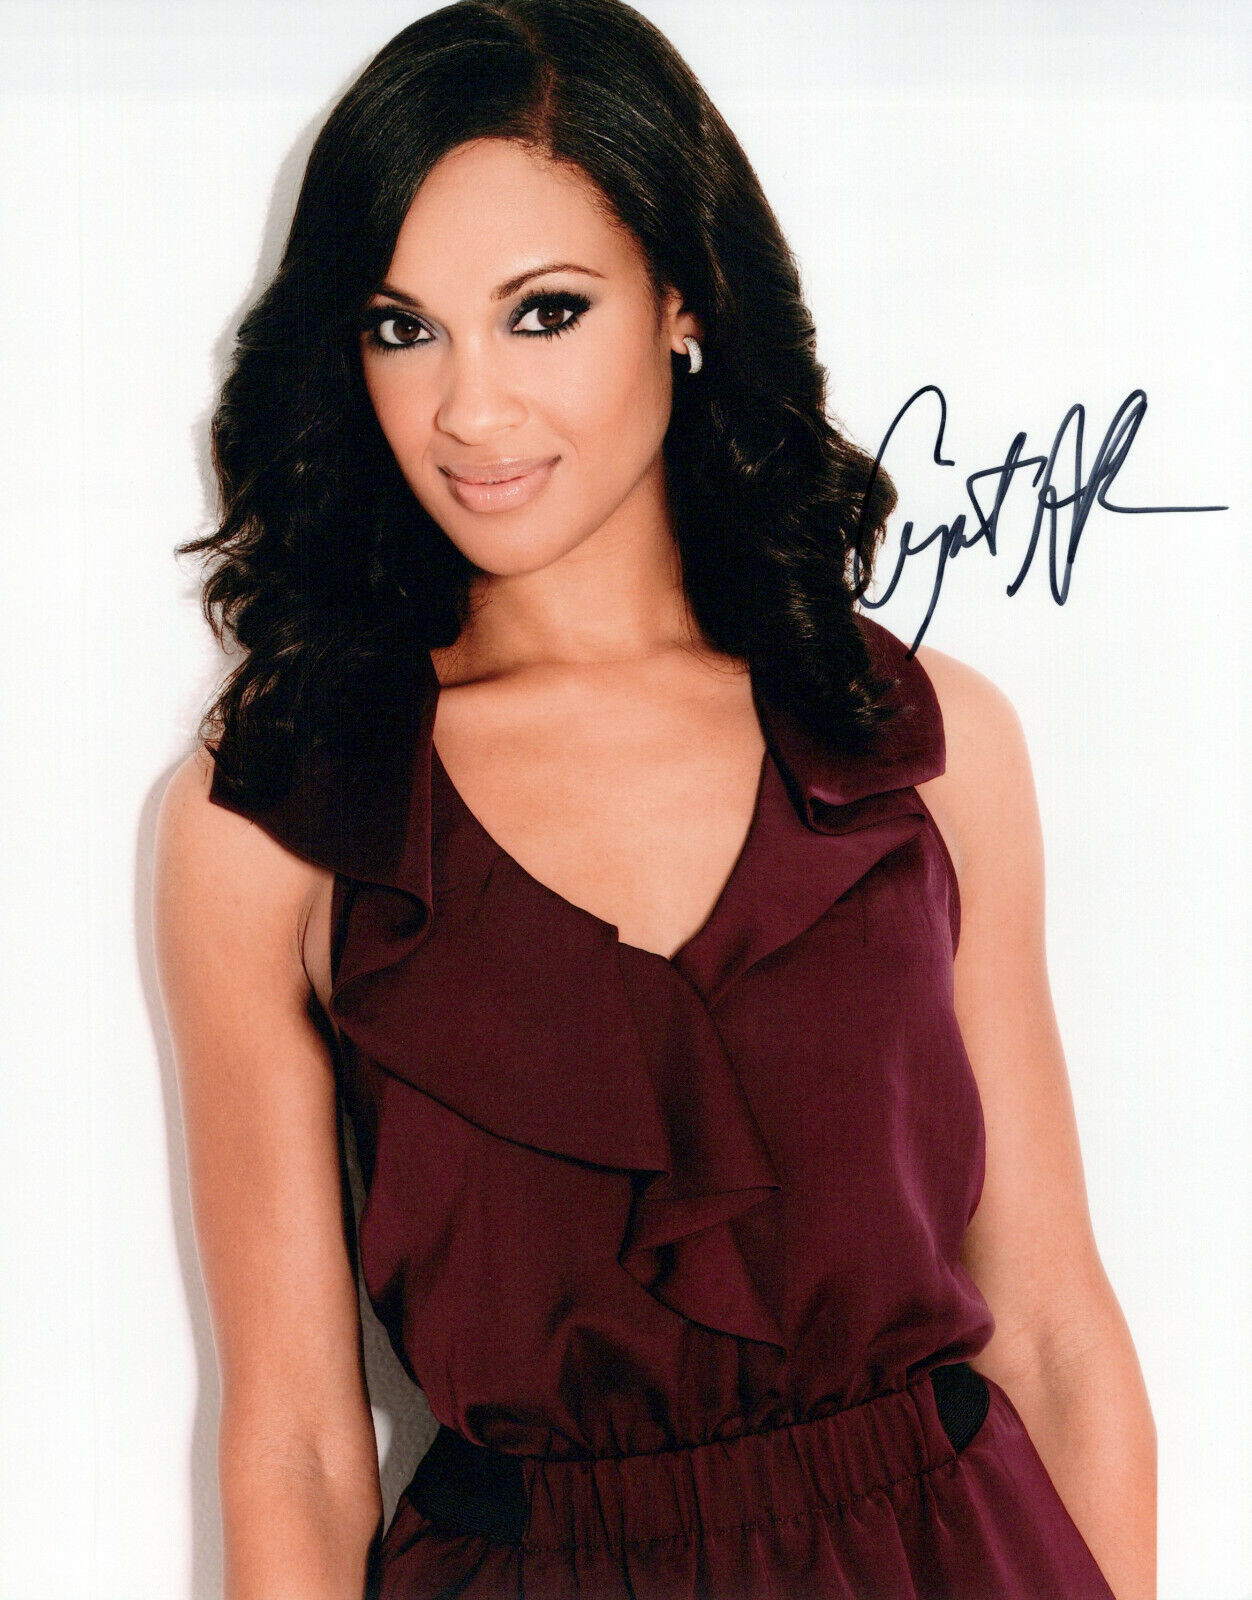 Cynthia Addai Robinson glamour shot autographed Photo Poster painting signed 8x10 #2